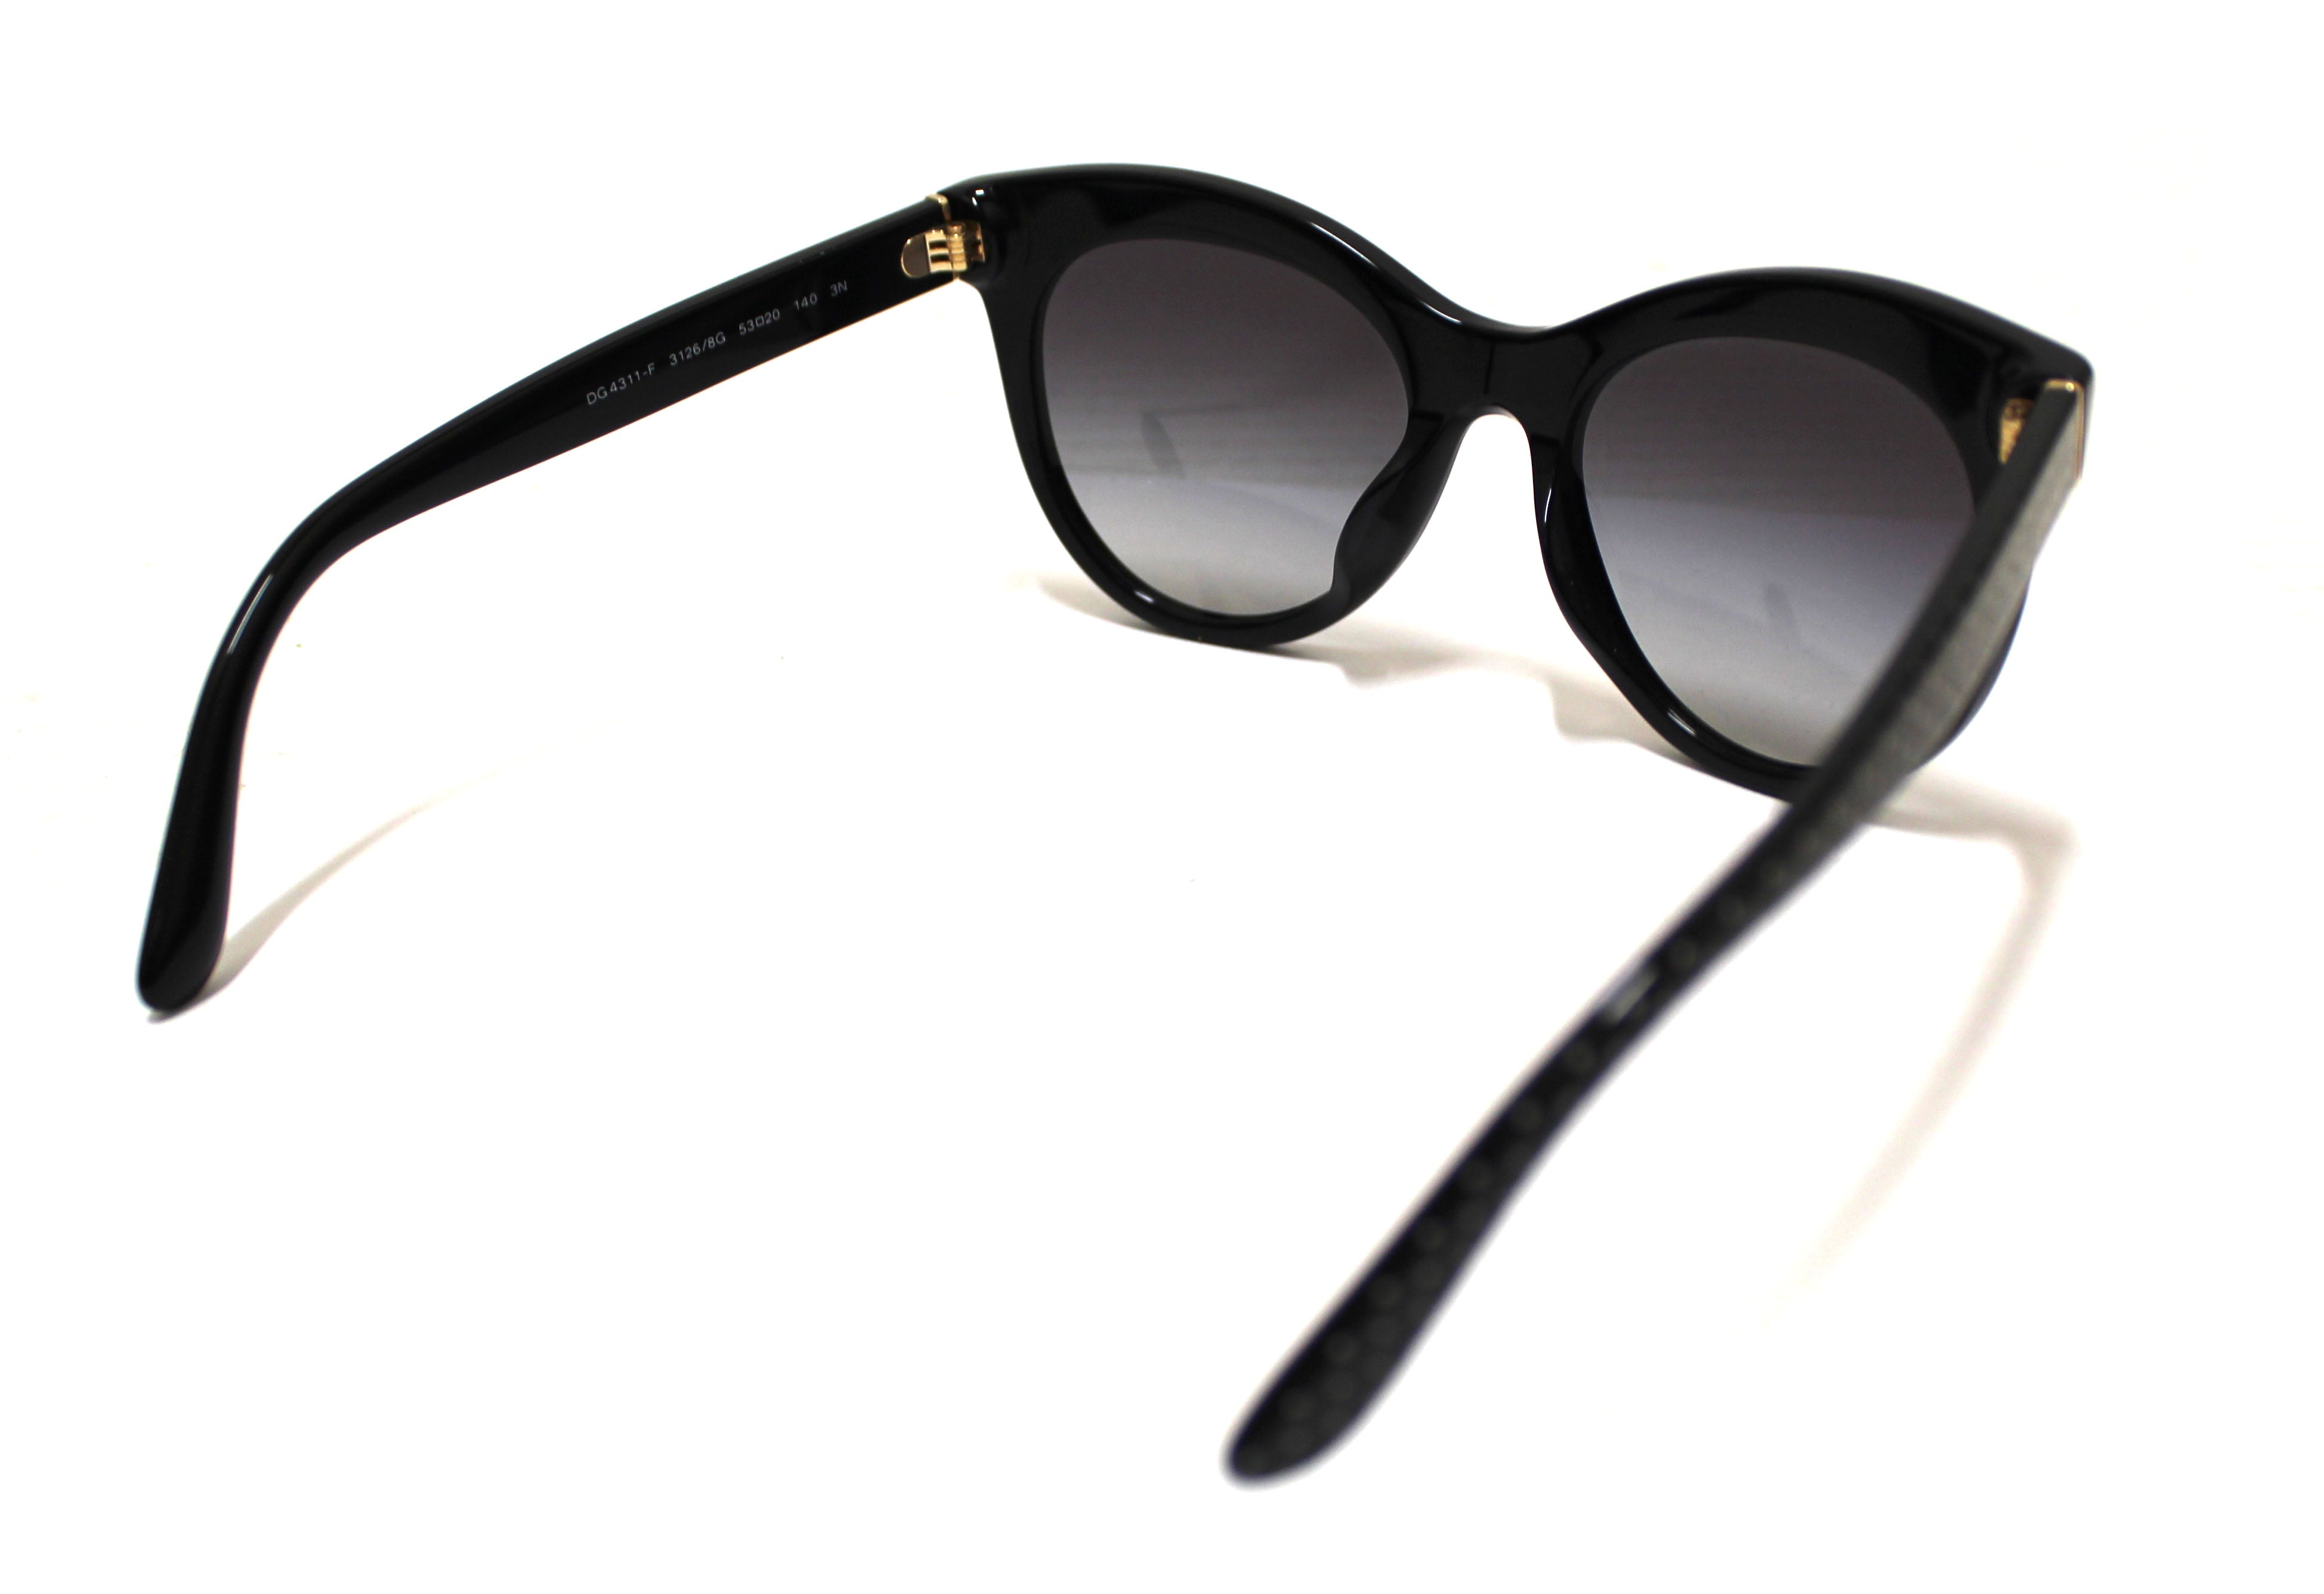 NEW Authentic Dolce and Gabbana Black with White Pin dot Sunglasses DG4311-F